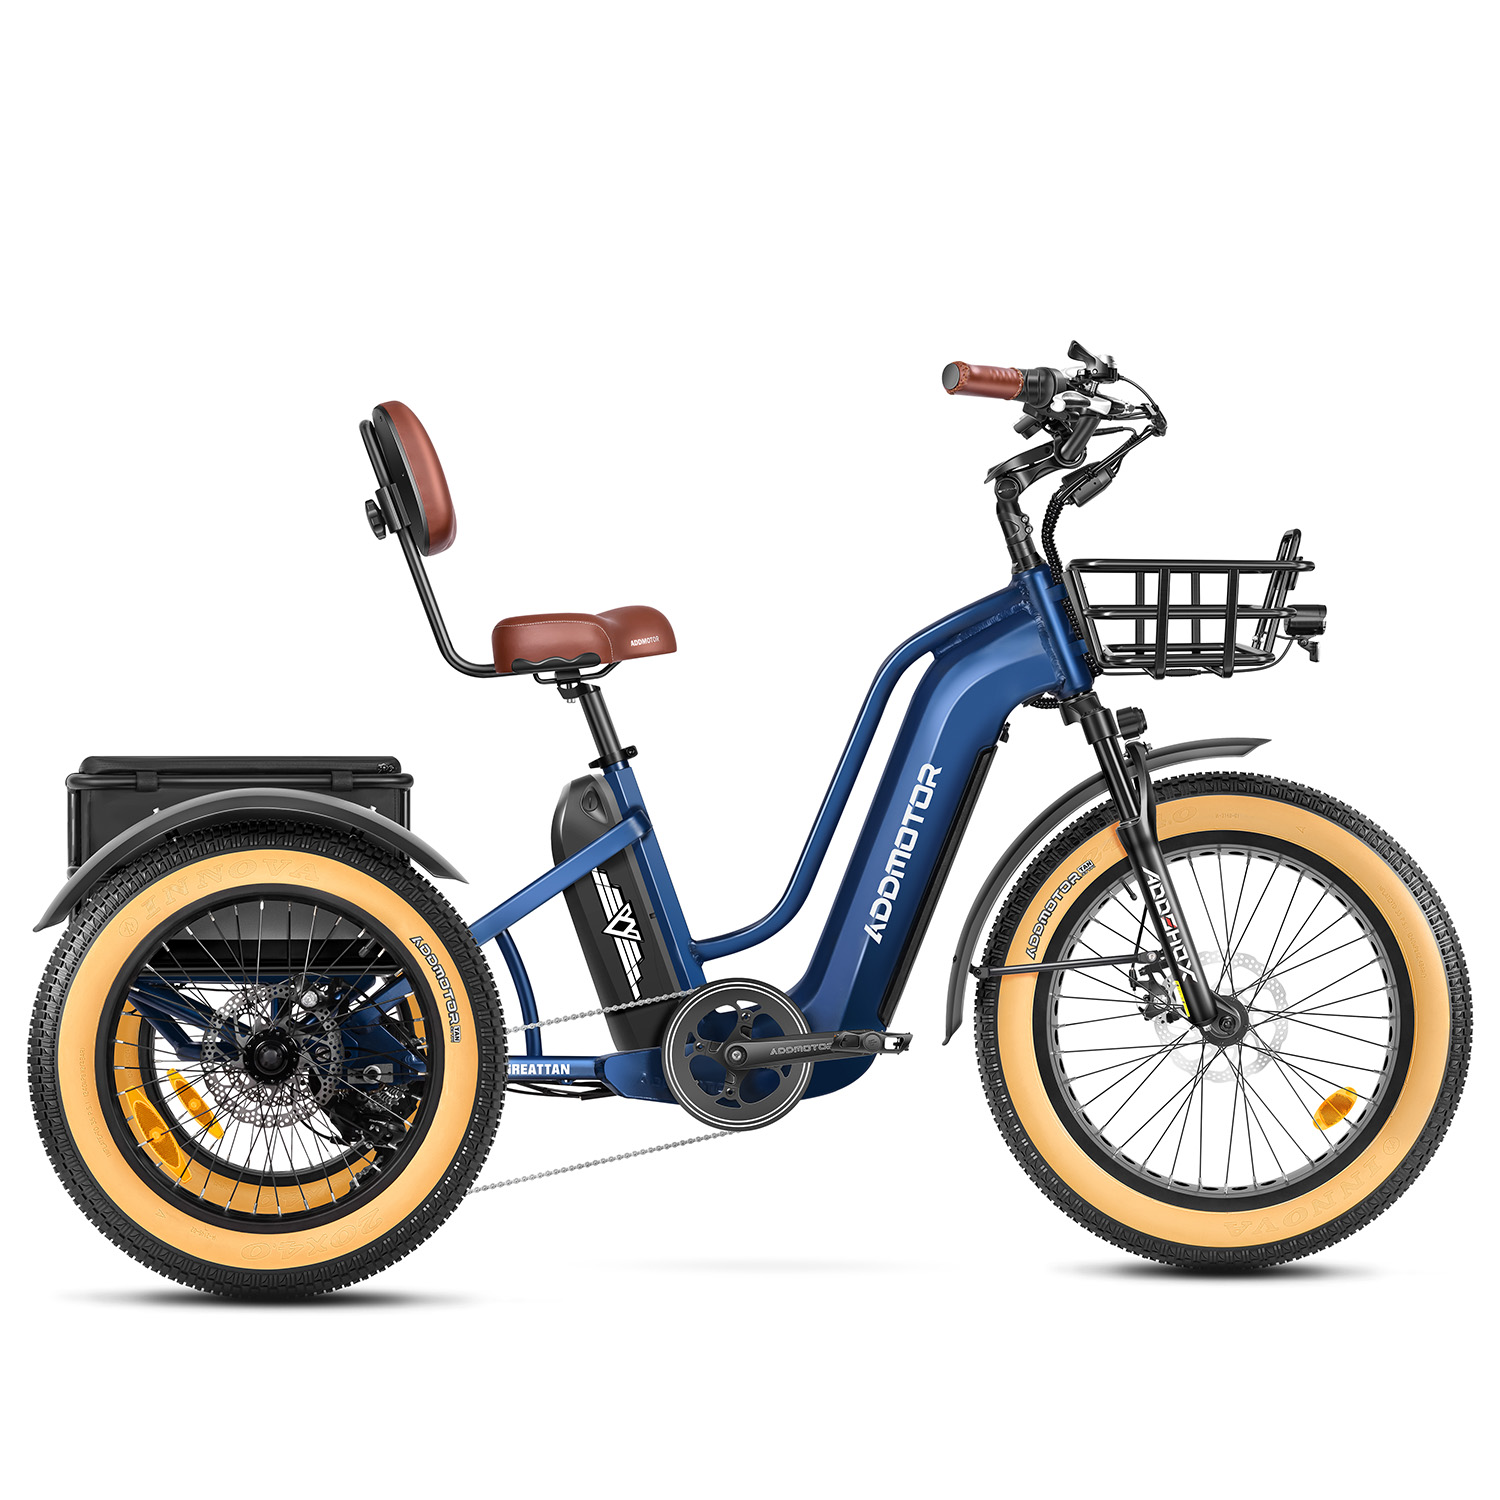 Addmotor Greattan Dual-Battery Electric Trike for Adult | Fat Tire Built-in Battery Design Electric Tricycle | Up to 160+ Miles Range | Neptune Blue